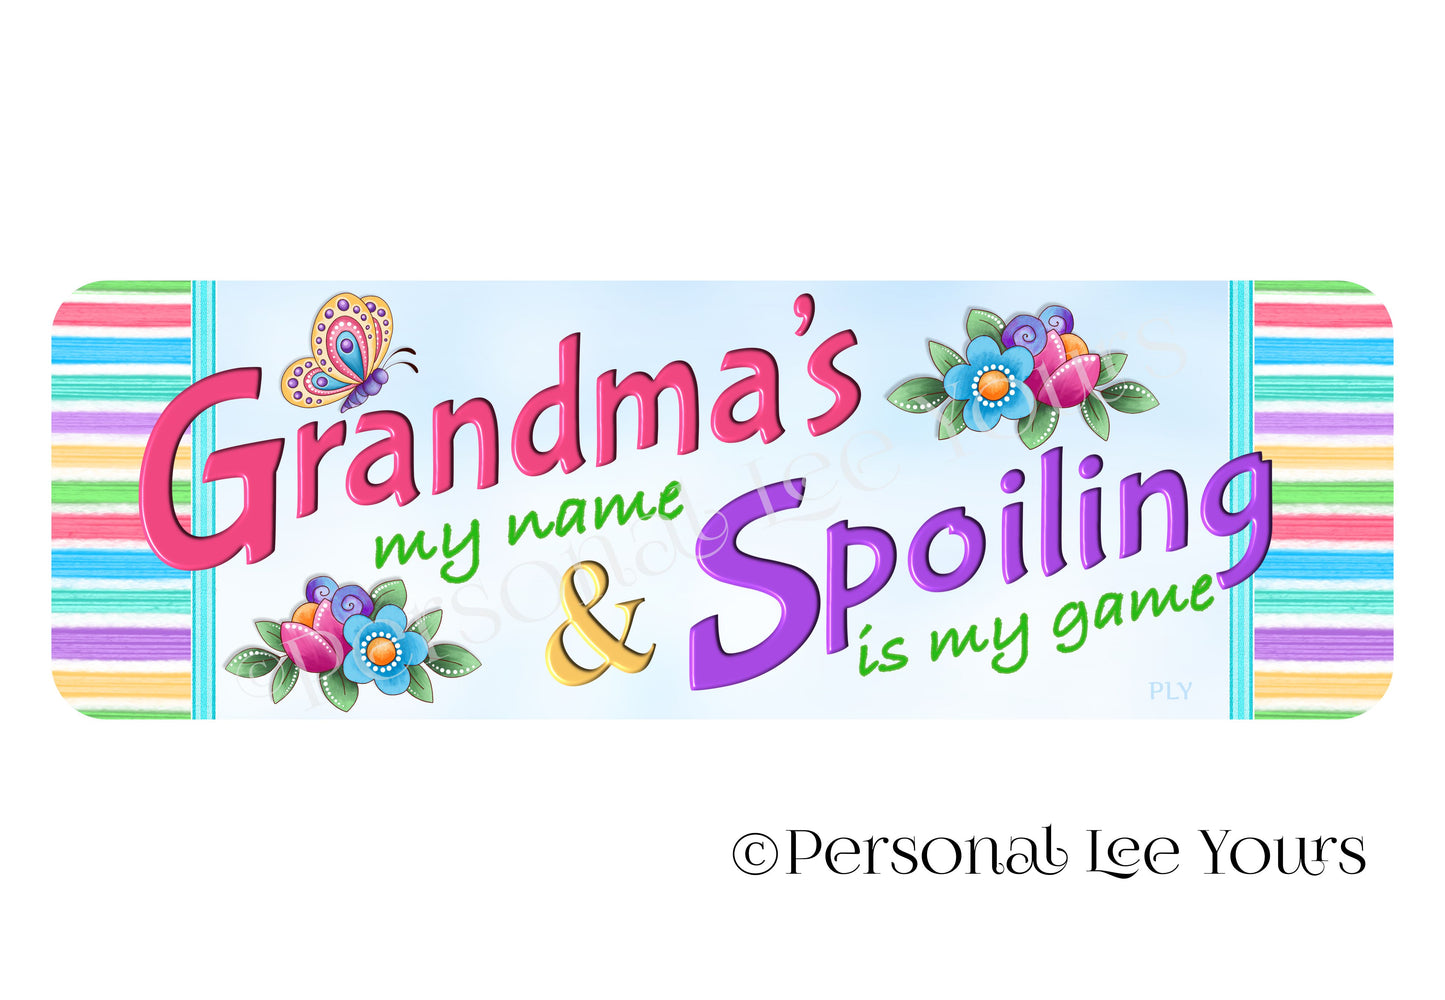 Wreath Sign * Banner * Grandma's My Name & Spoiling Is My Game * 4" x 12" * Lightweight Metal